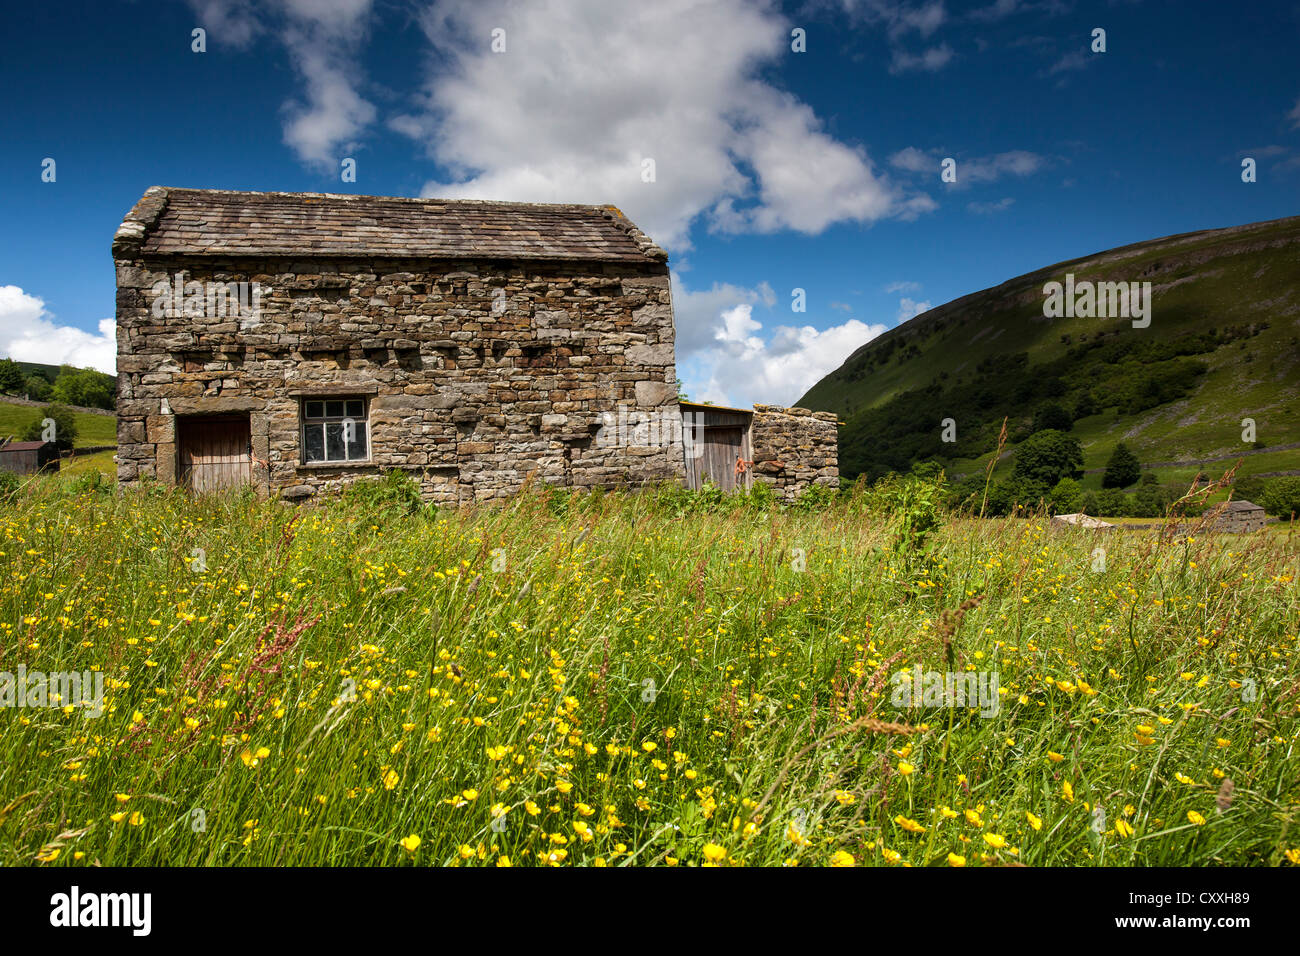 Wild Flower Meadow and stone barn at Muker, Swaledale, Yorkshire Dales National Park Stock Photo